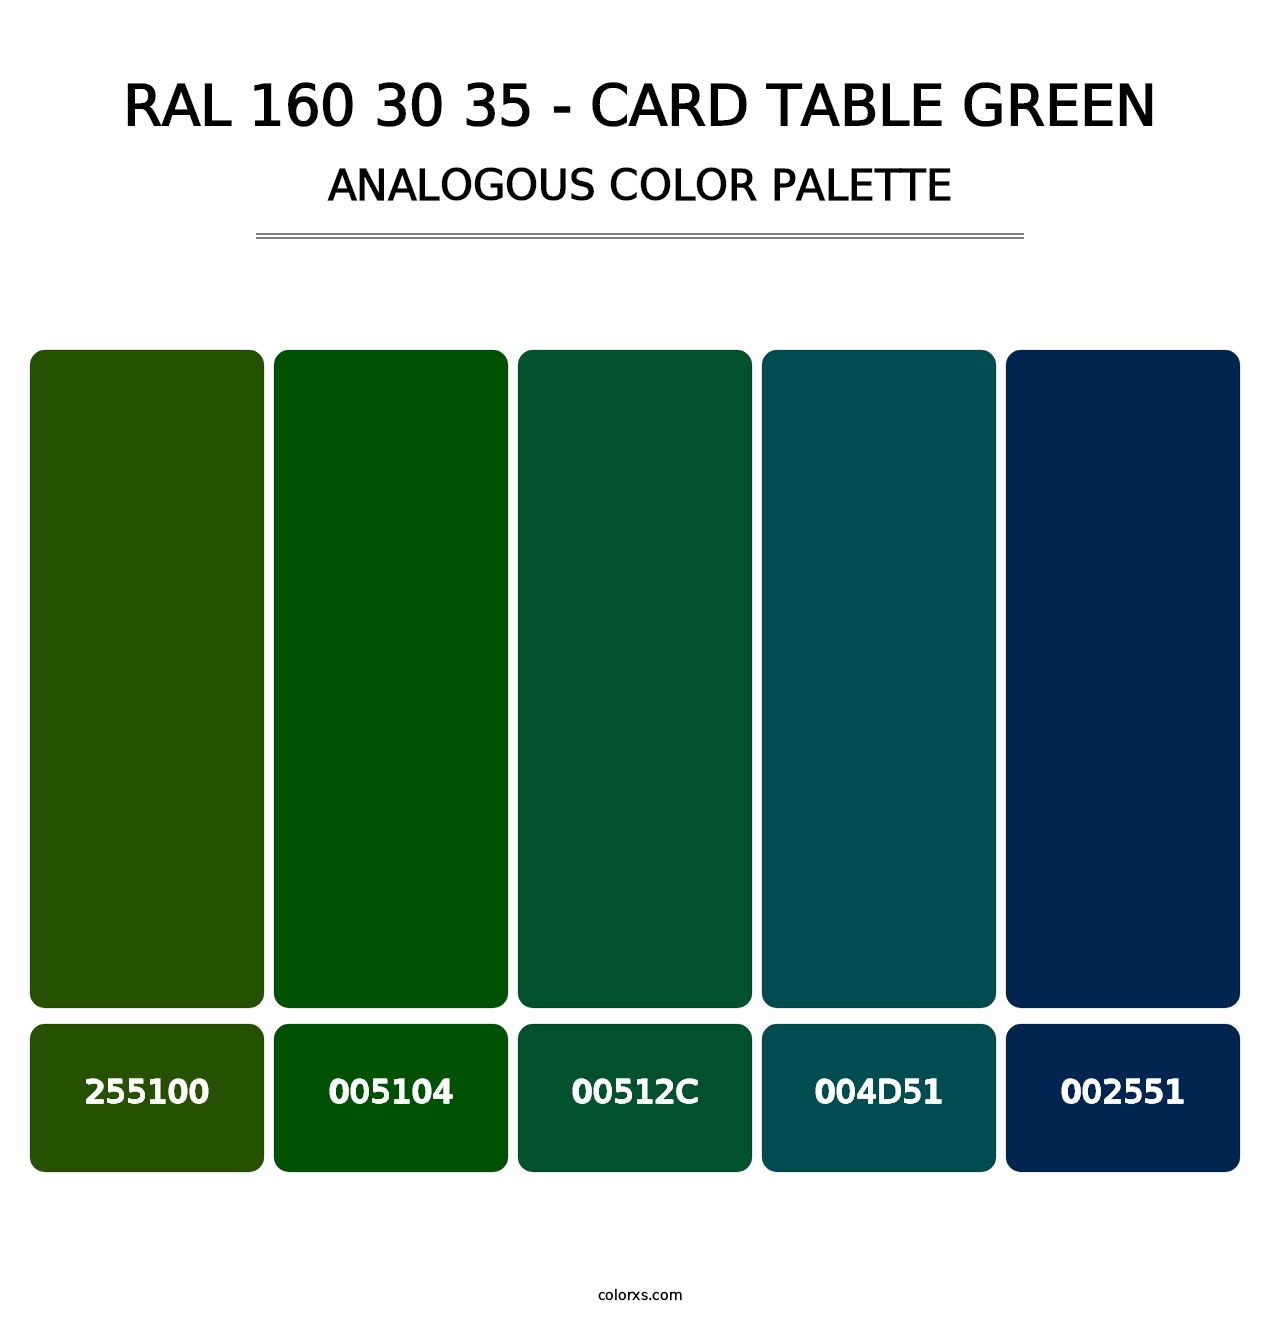 RAL 160 30 35 - Card Table Green - Analogous Color Palette